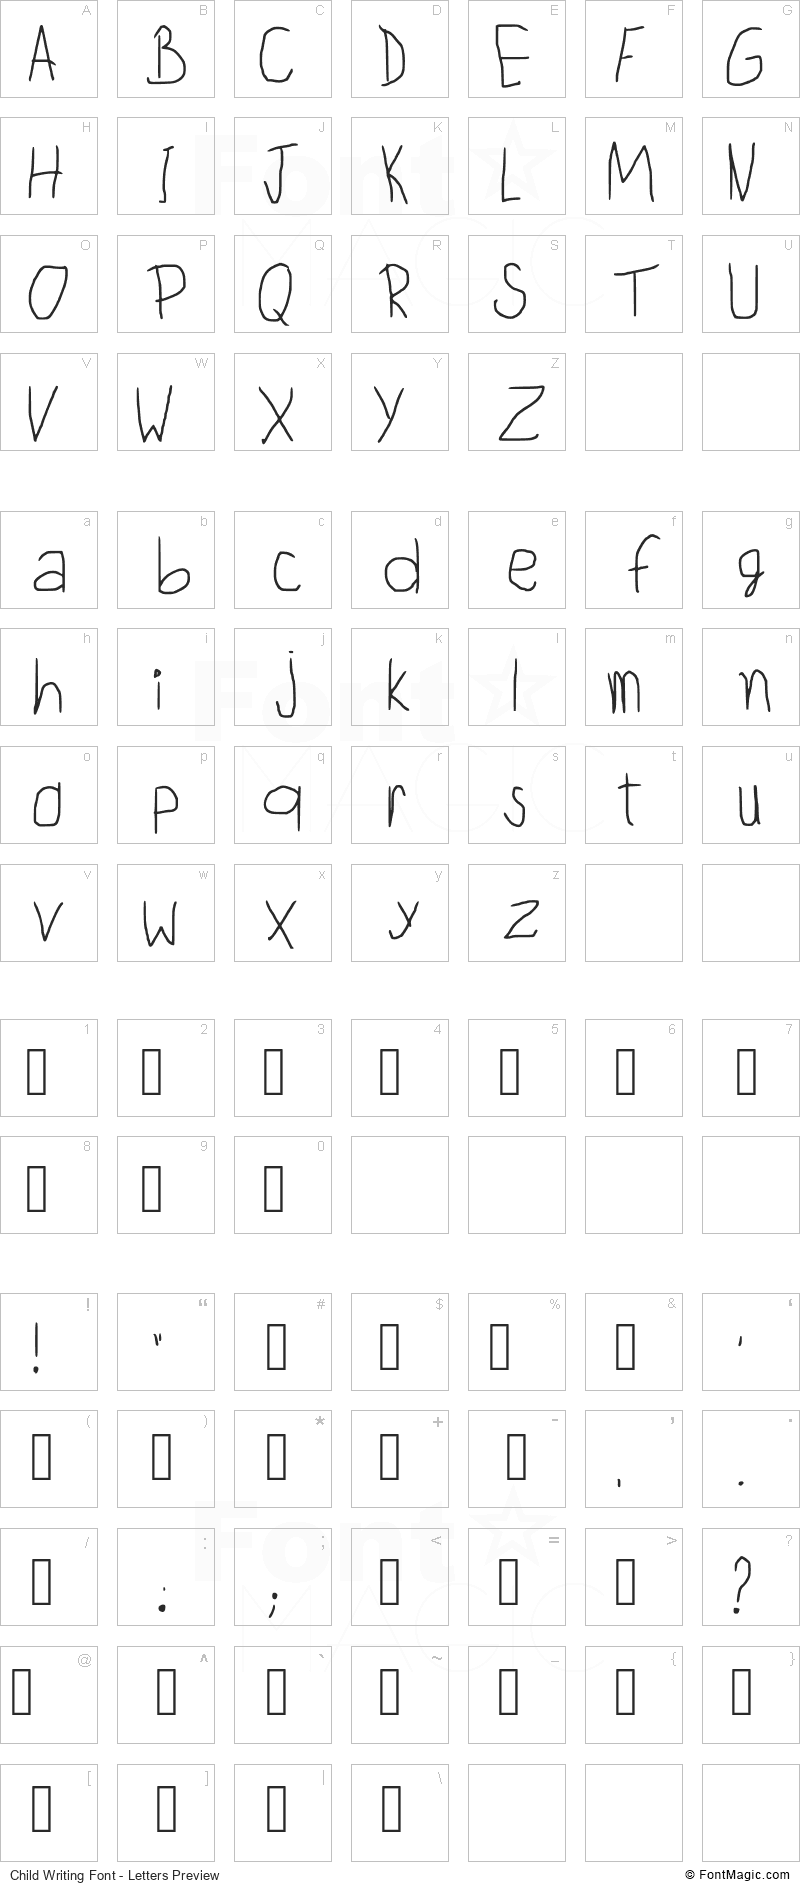 Child Writing Font - All Latters Preview Chart